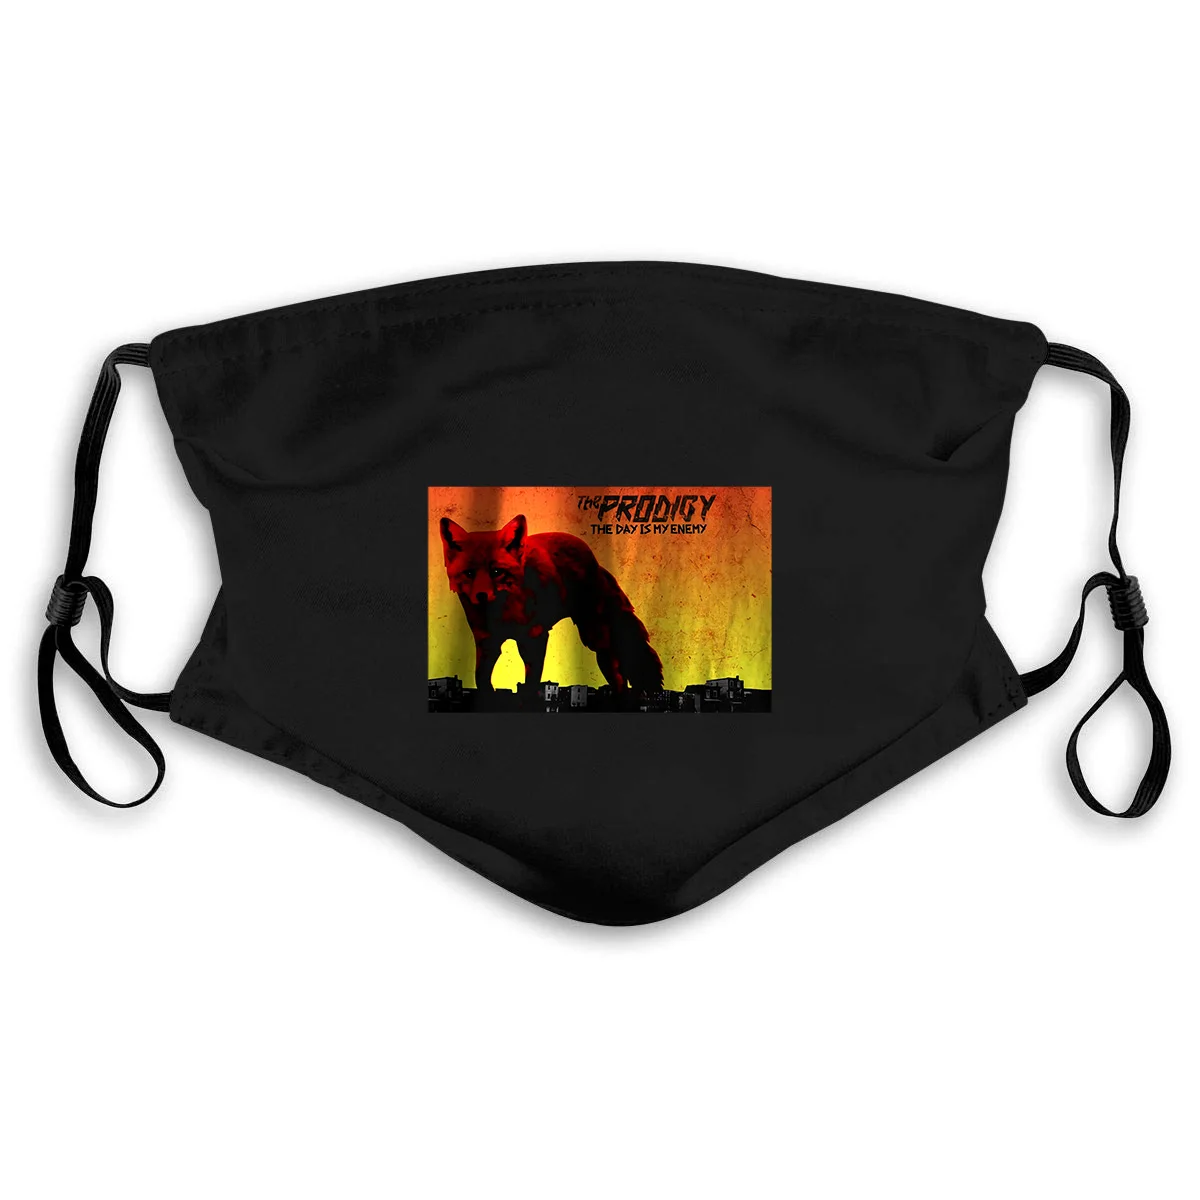 

New The Prodigy The Day Is My Enemy Novelty Cool Men'S Mouth Mask Women's kid PM2.5